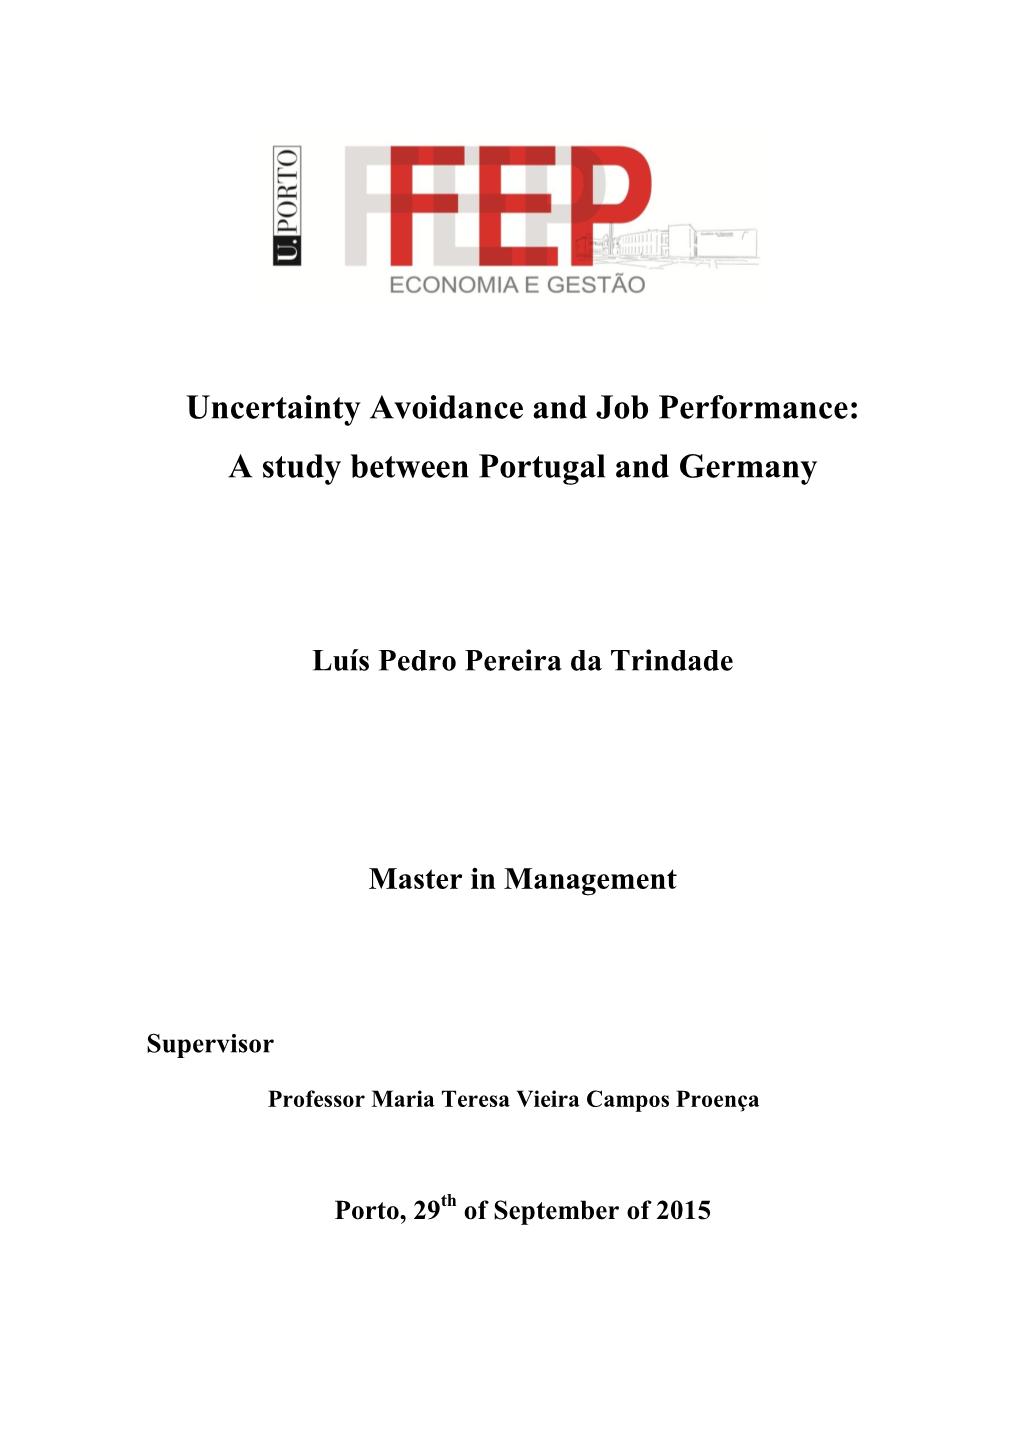 Uncertainty Avoidance and Job Performance: a Study Between Portugal and Germany